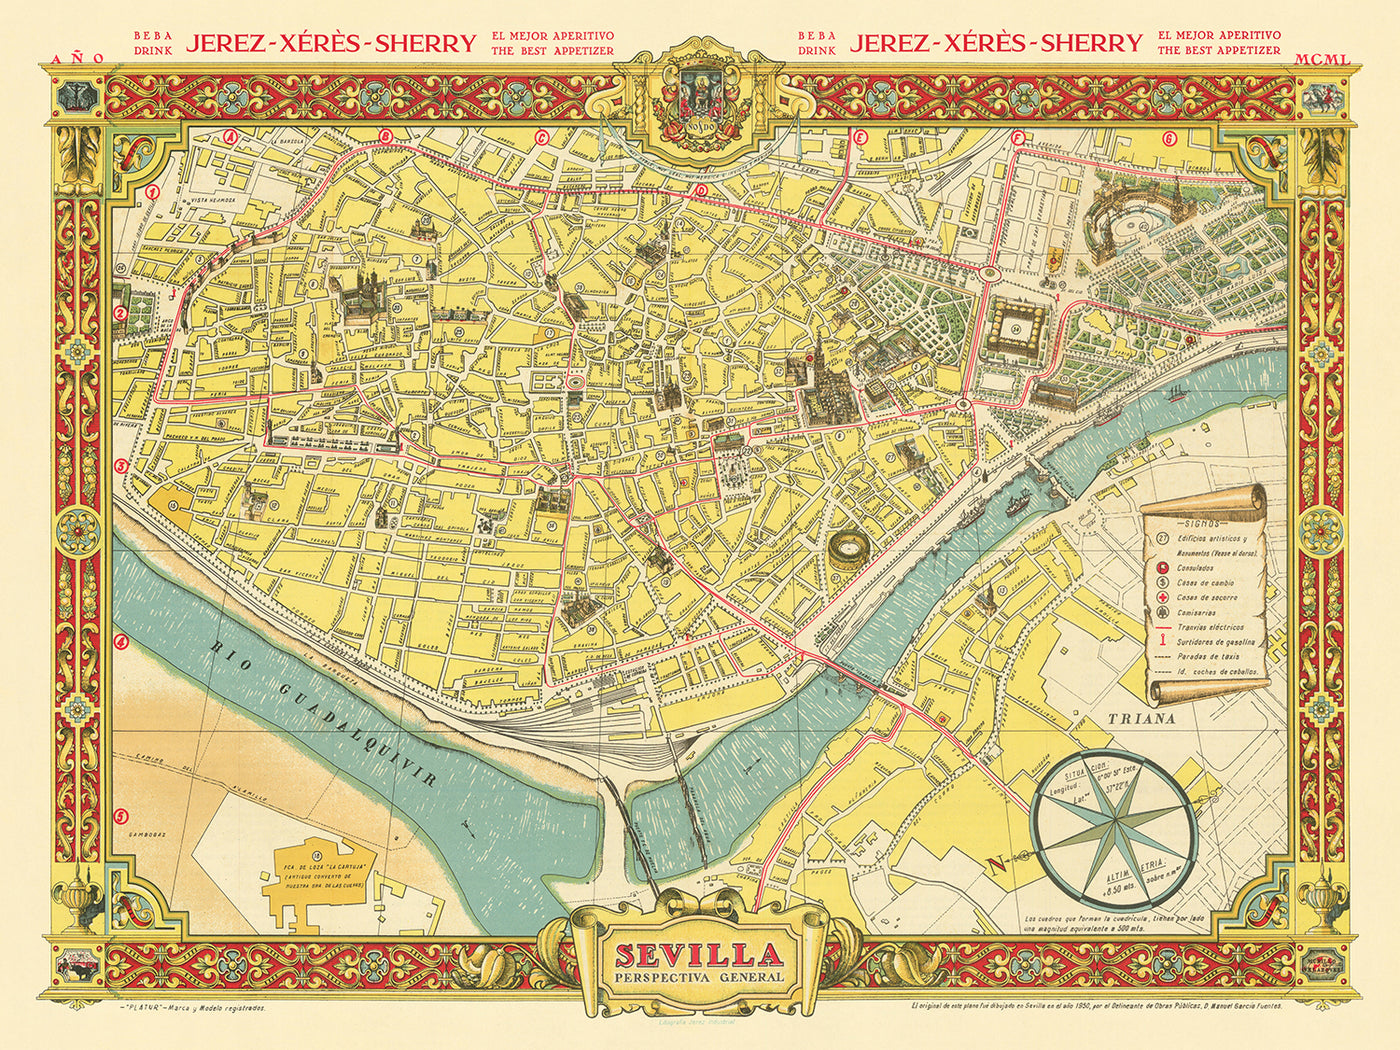 Old Pictorial Map of Seville by Fuentes, 1950: Catedral, Torre del Oro, Triana, Alcázar, Guadalquivir